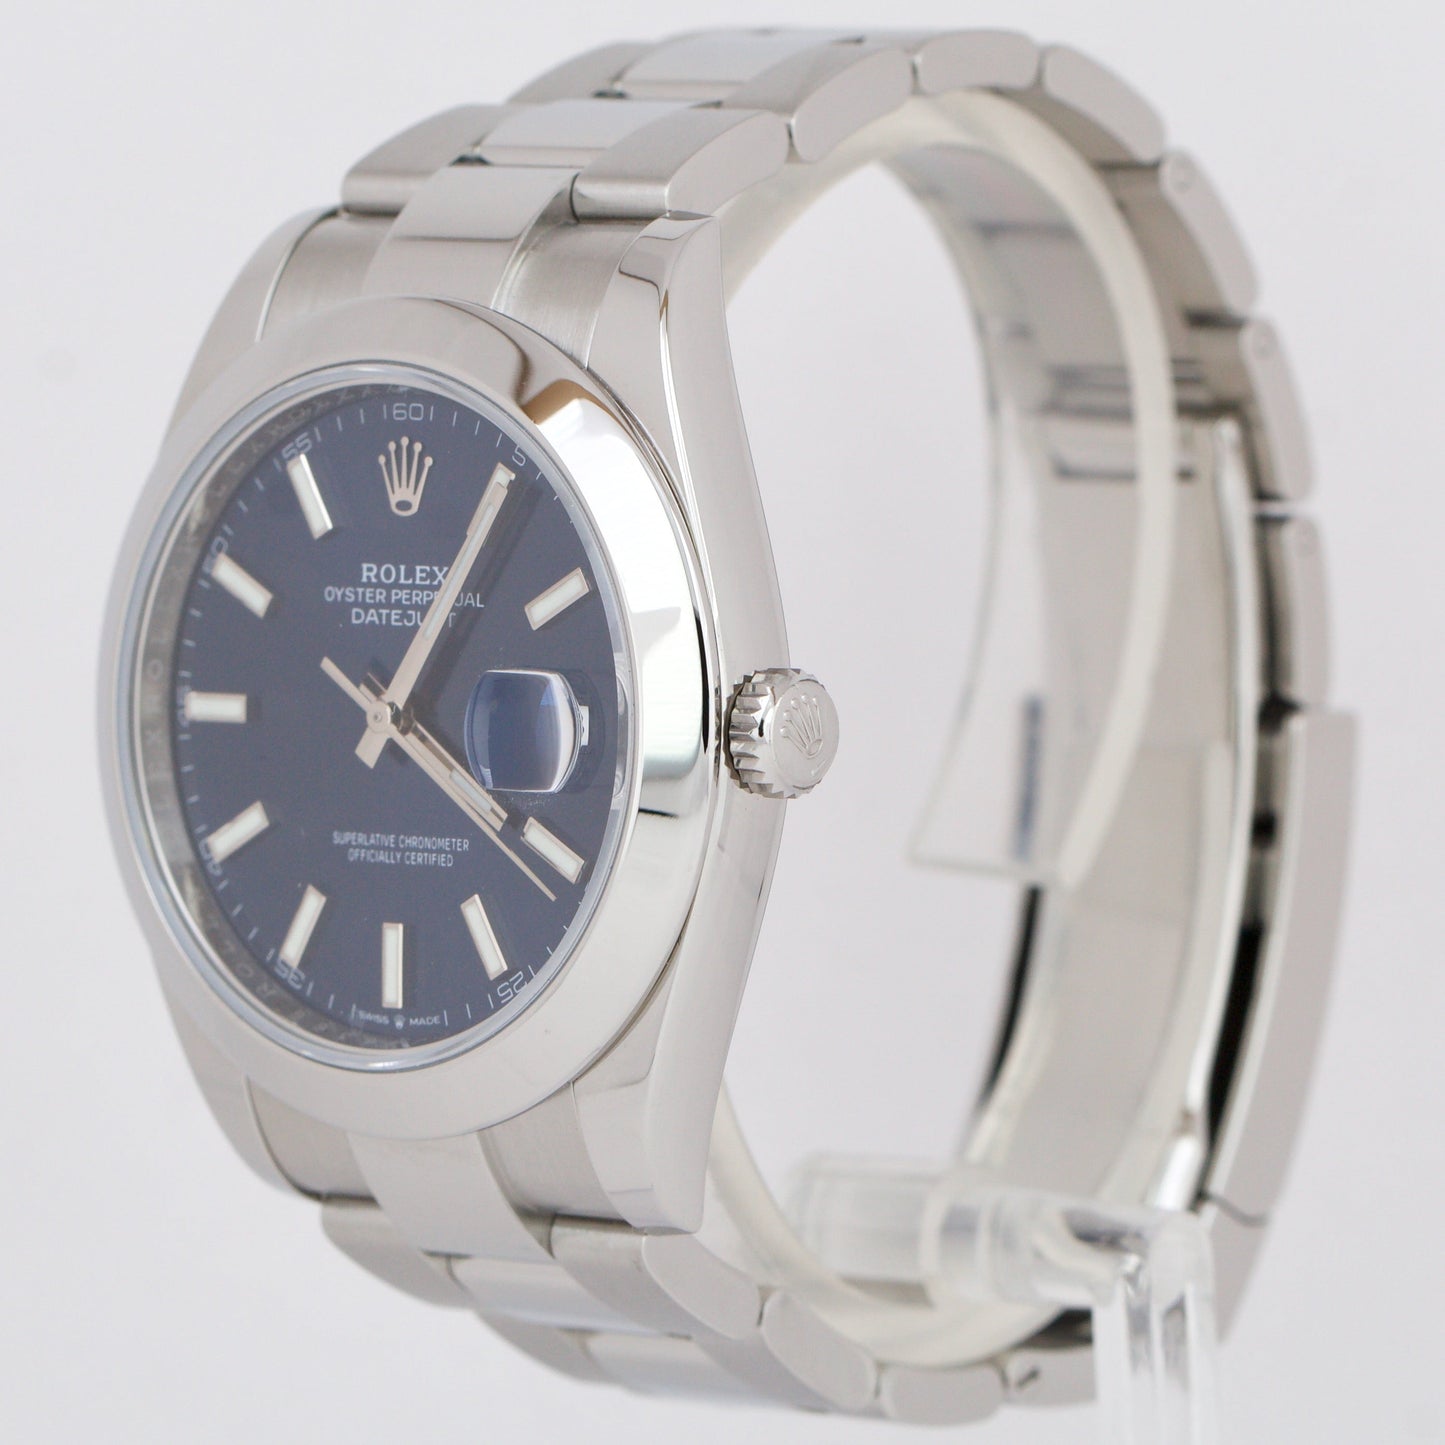 Rolex DateJust 41 Blue Dial 41mm Smooth Stainless Steel Oyster Date Watch 126300